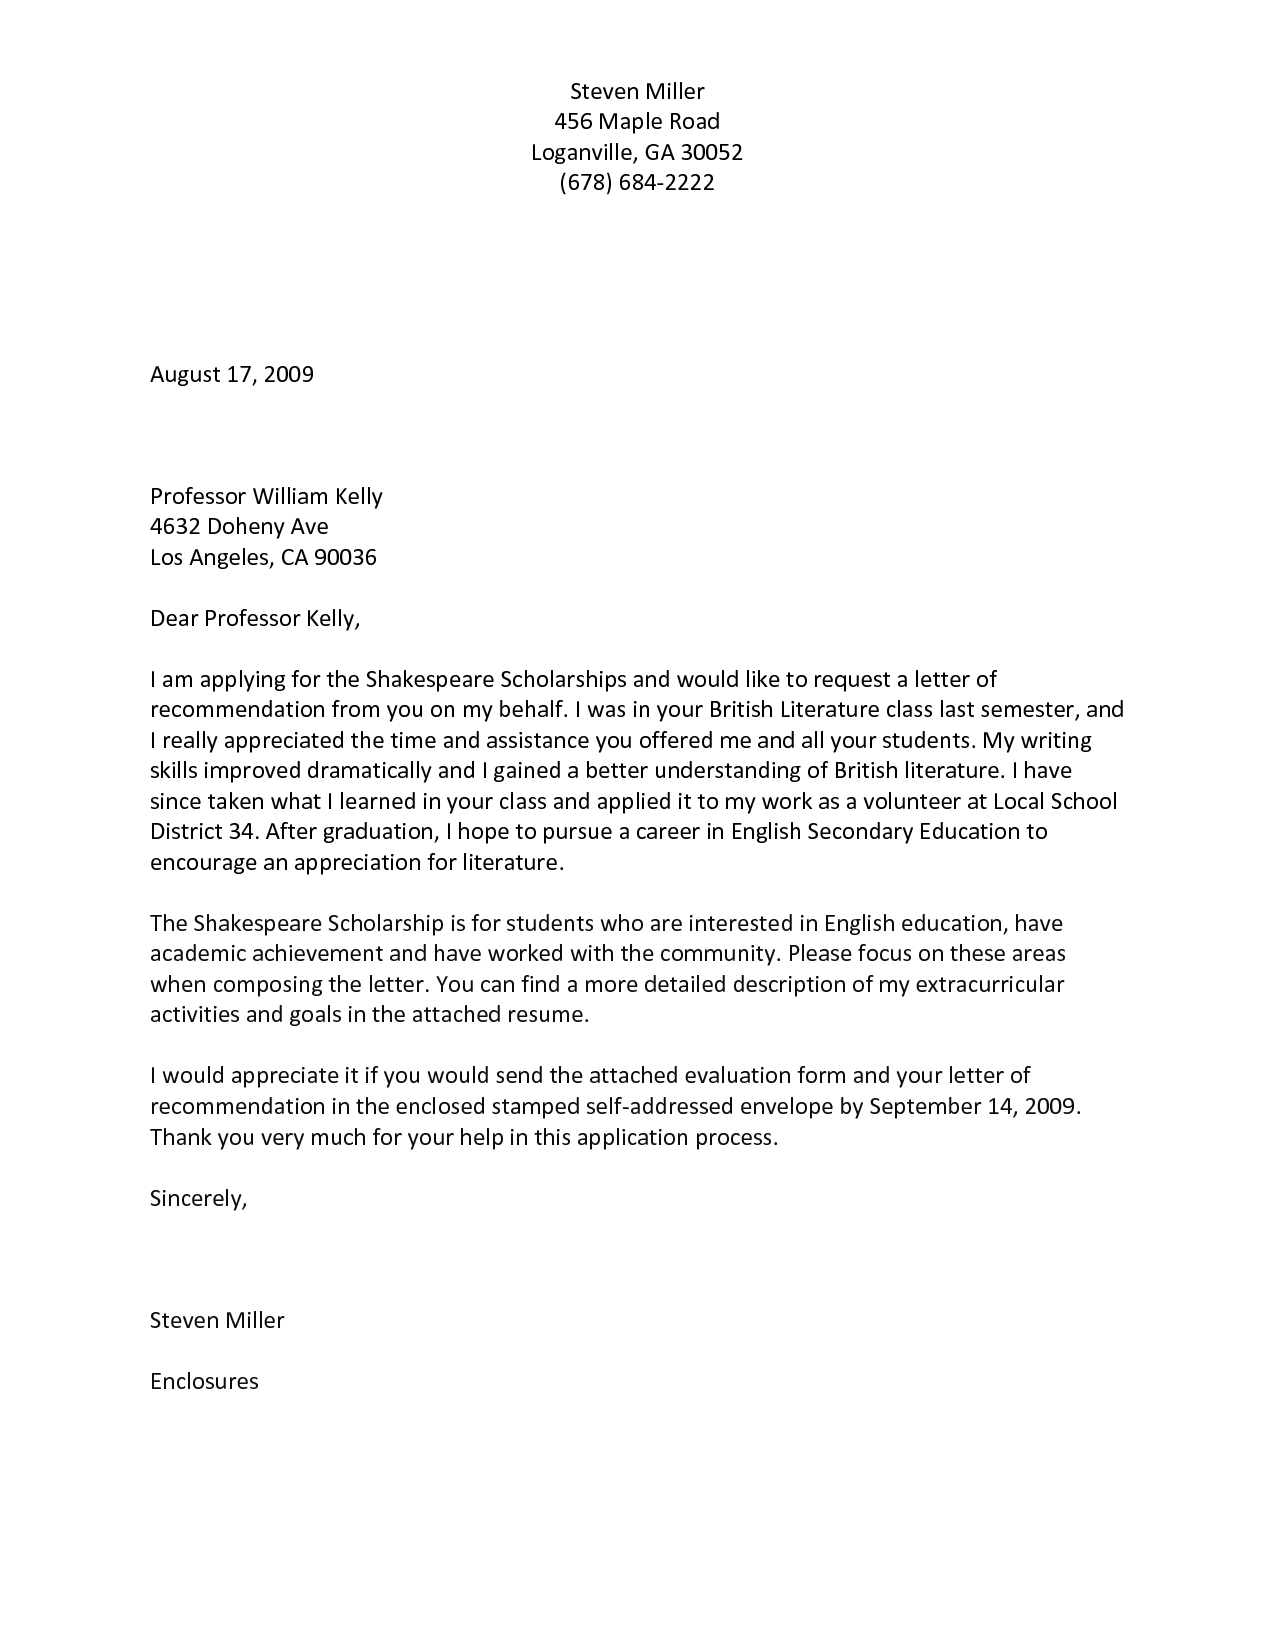 Letter Of Recommendation Request Template Template Business in sizing 1275 X 1650